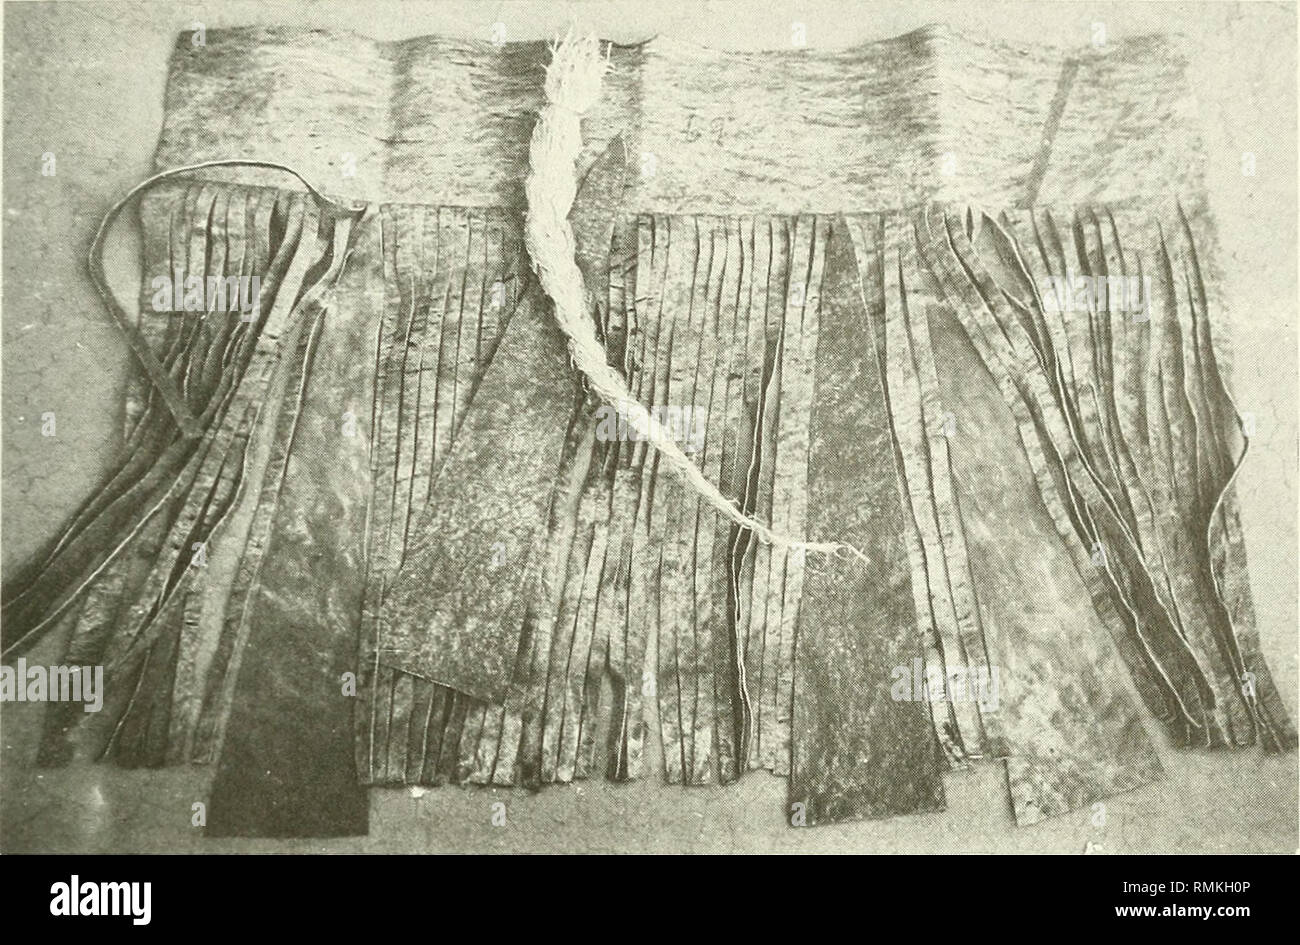 . Annals of the South African Museum = Annale van die Suid-Afrikaanse Museum. Natural history. SOME NGUNI CRAFTS: SKIN-WORKING TECHNOLOGY 367. Fig. 38. Hide cut to make a skin skirt, isidwaba: Bergville, 1969. Showing deep waistband, narrow strips, wide wedge-shaped panels, and sinew thread for sewing. Drakensberg area In 1969 Ngwane skin-workers made skirts for Ngwane and Zizi customers on the same pattern as the Zulu isidwaba. Southern Natal Formerly skirts of ox- or cowhide, or goatskin, were long and reached to the ankles, according to a contemporary of Cetshwayo's from the Umlazi area (We Stock Photo